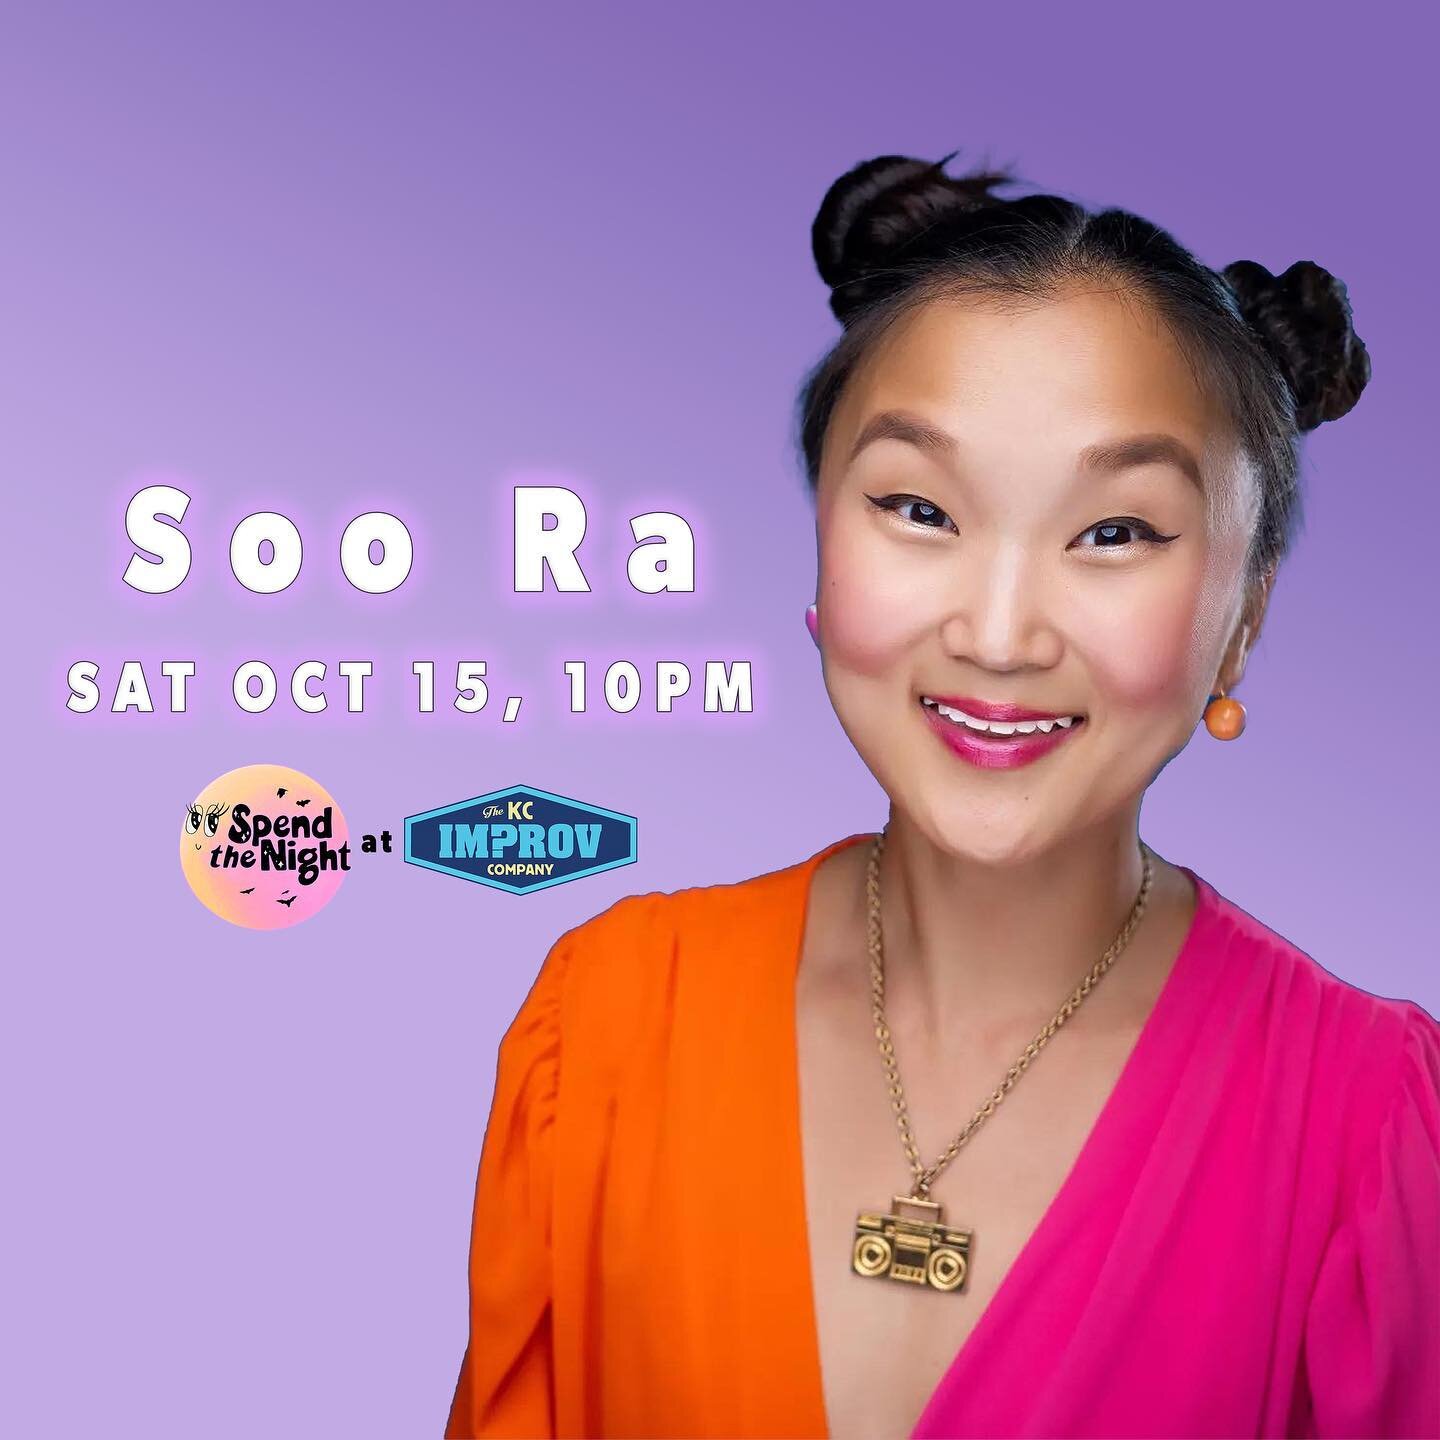 💕🎃SATURDAY🎃💕 kansas city you do not want to miss it! headlining Soo Ra @hoora4soora and featuring some 🔥 local talent, this will be the best costume party comedy show of the season ✨ as always we encourage dressing up to fit the theme! so don&rs